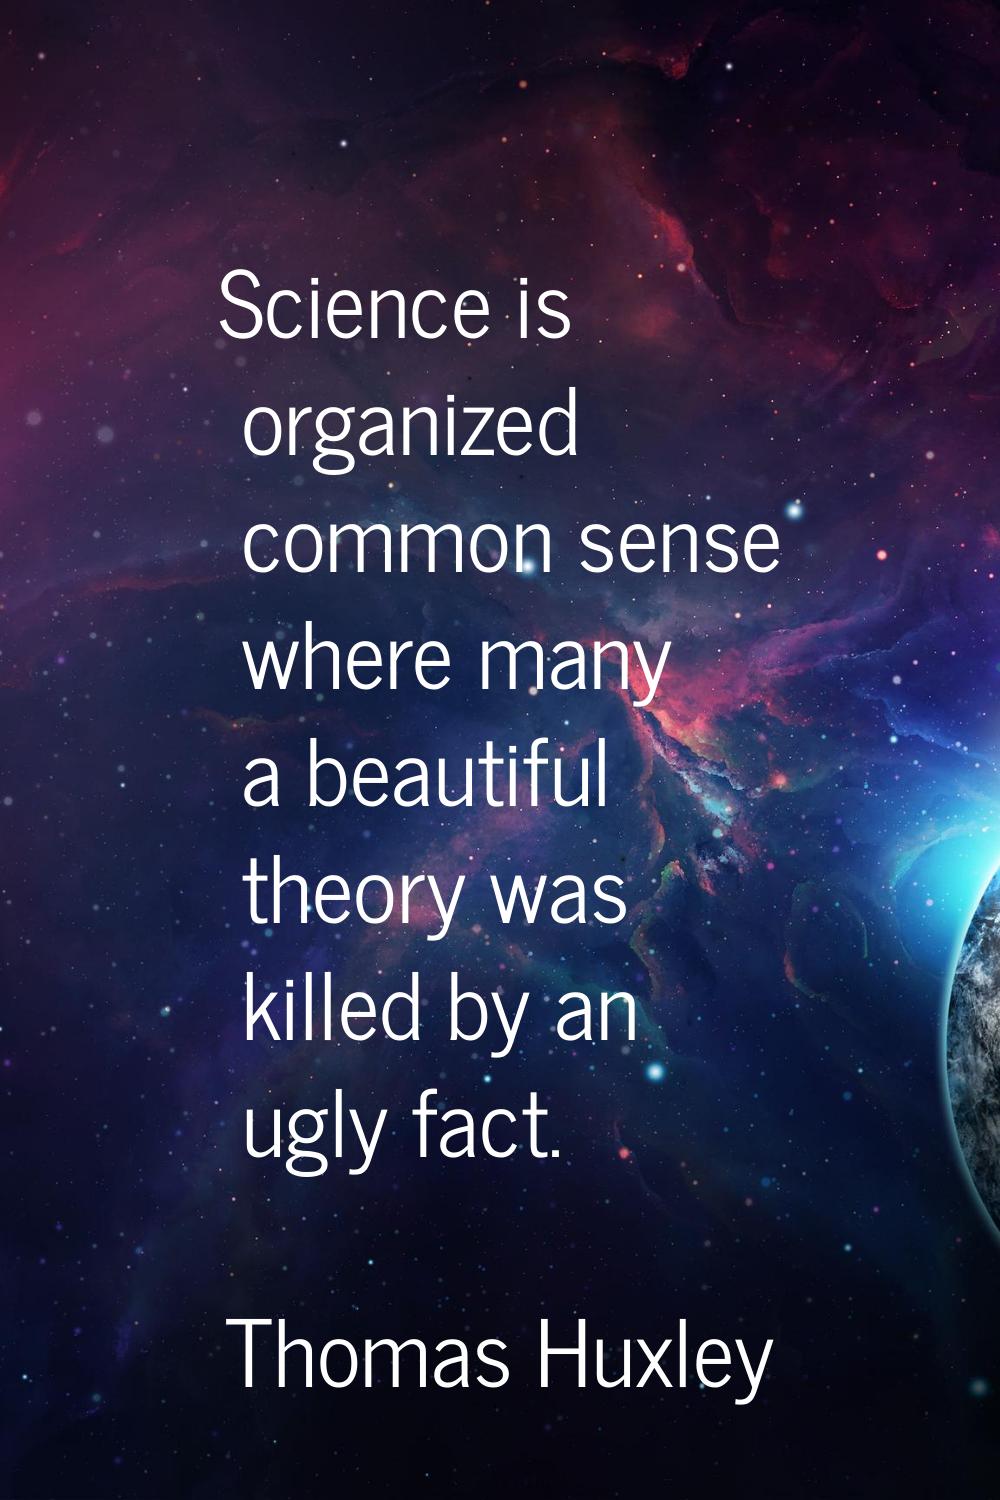 Science is organized common sense where many a beautiful theory was killed by an ugly fact.